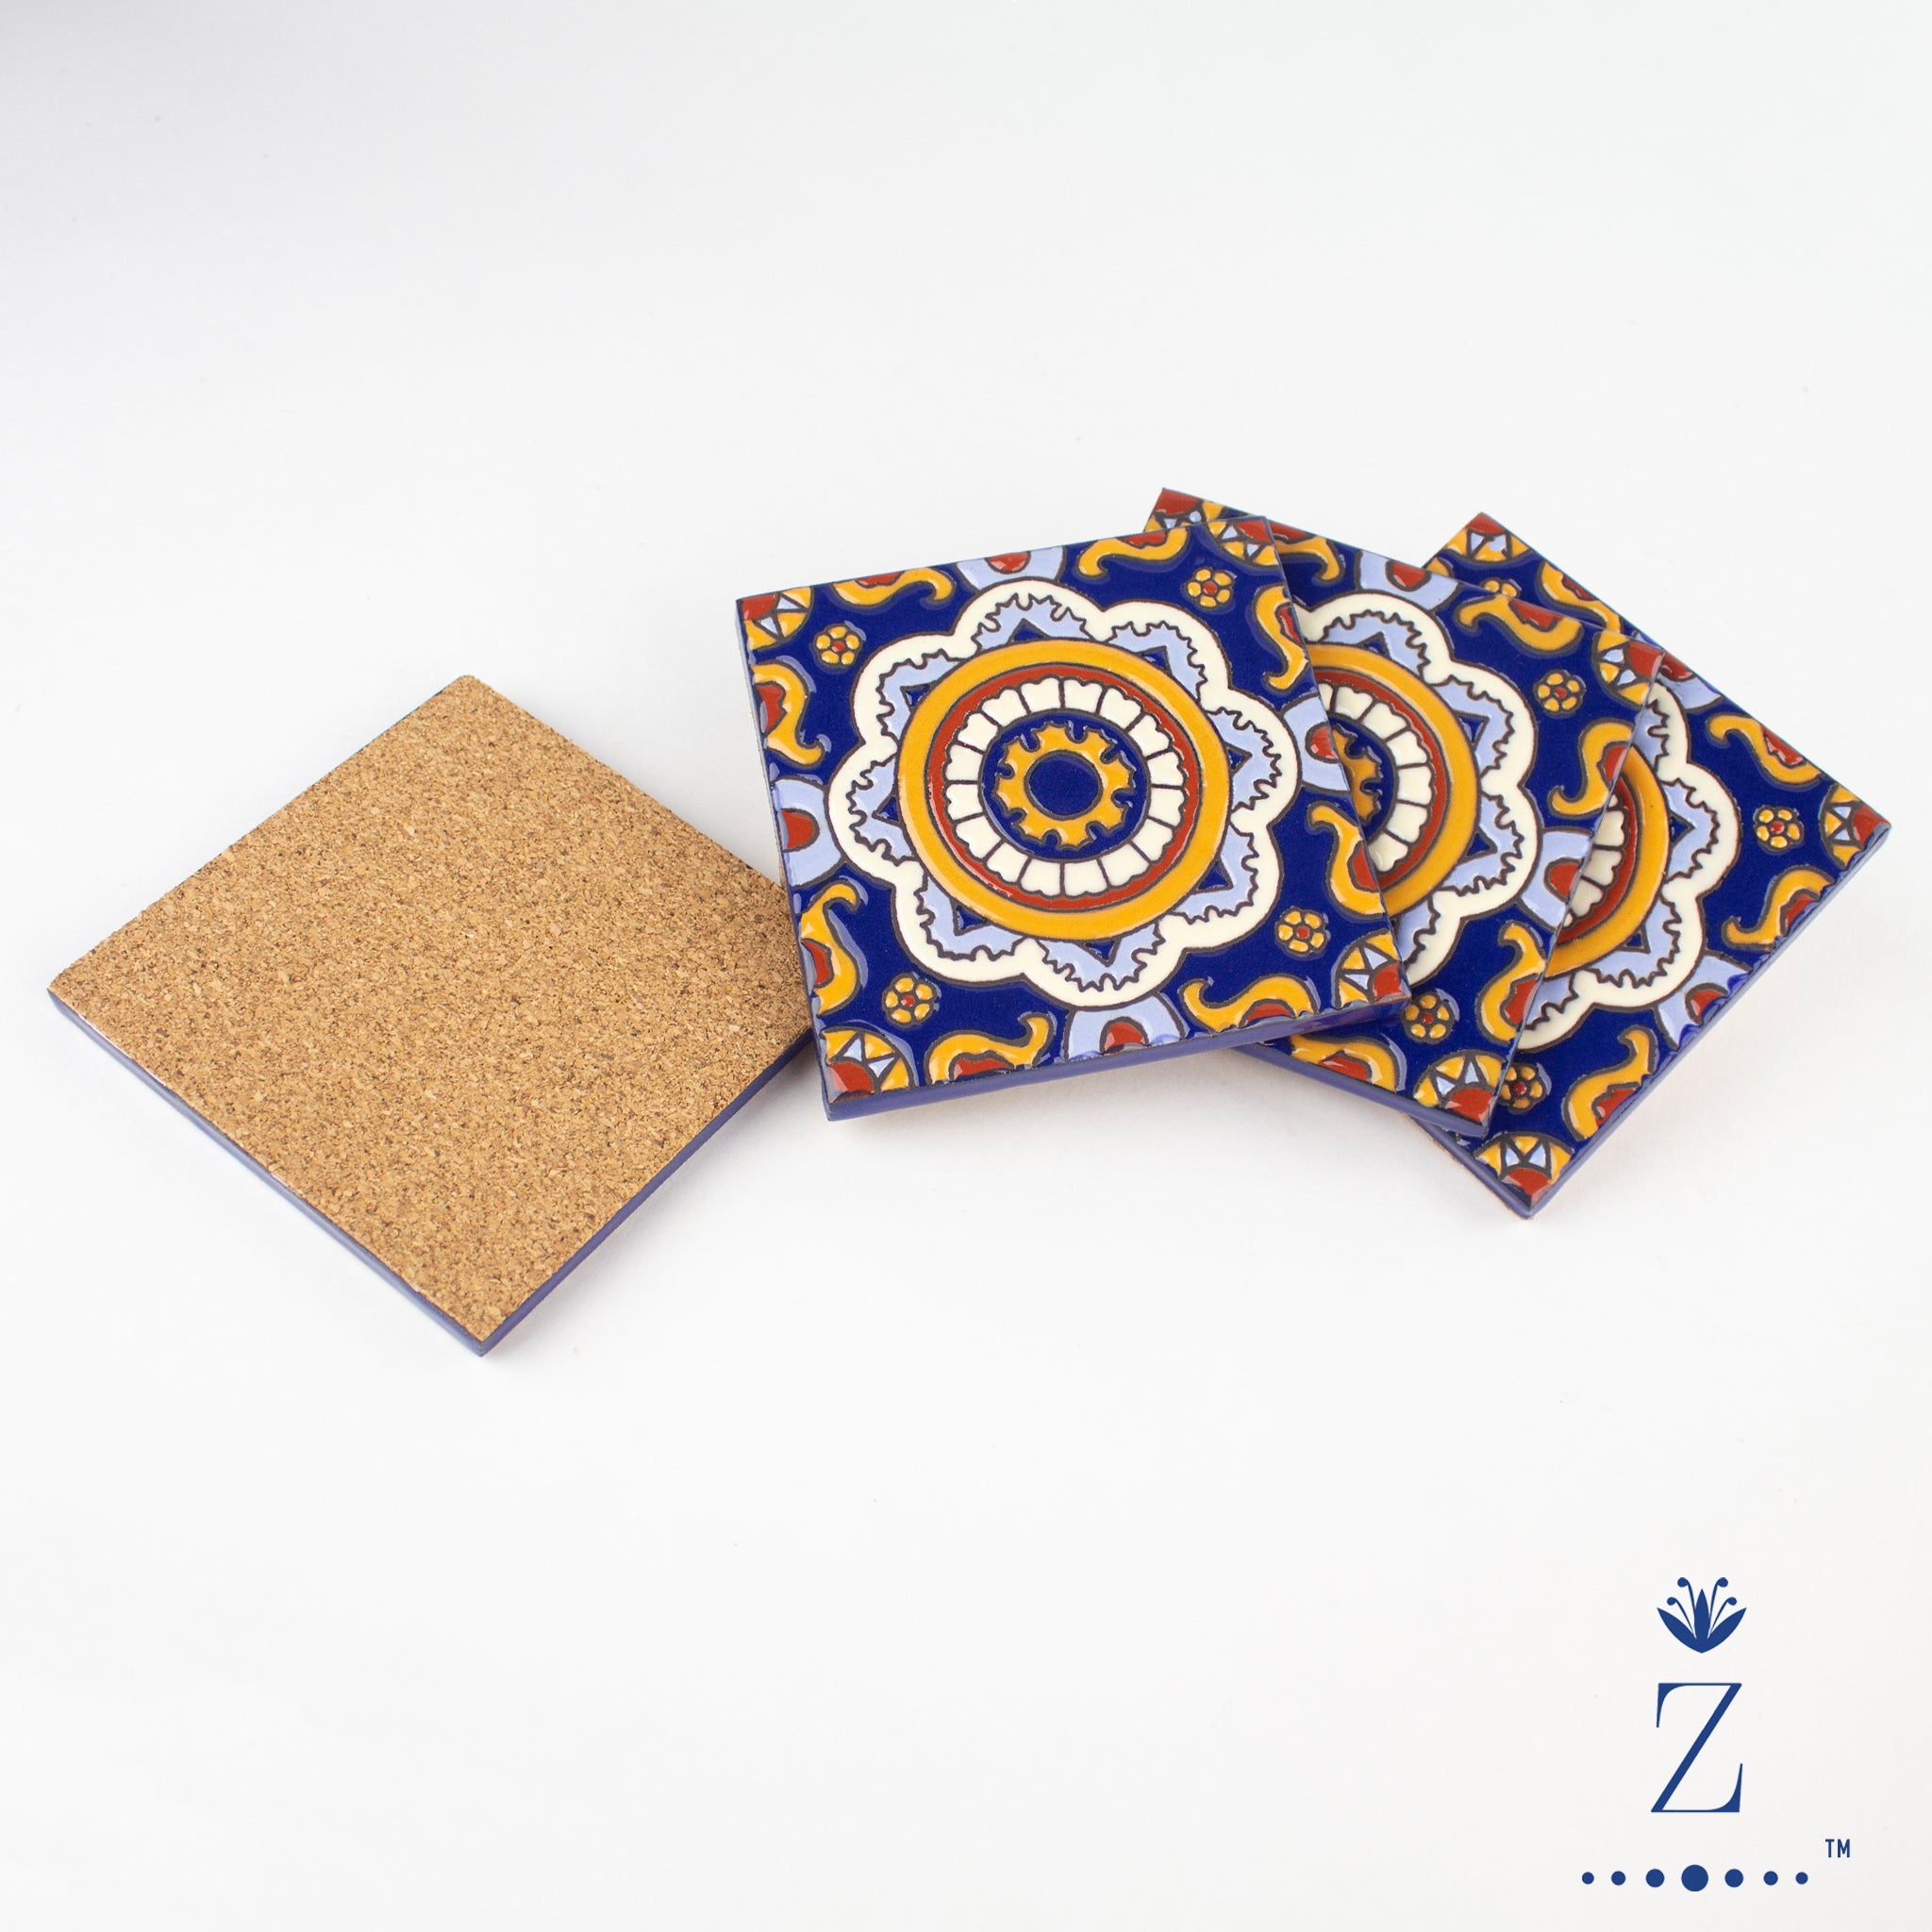 Portuguese Ceramic Tiles Drink Coasters and Table Trivets – We Are